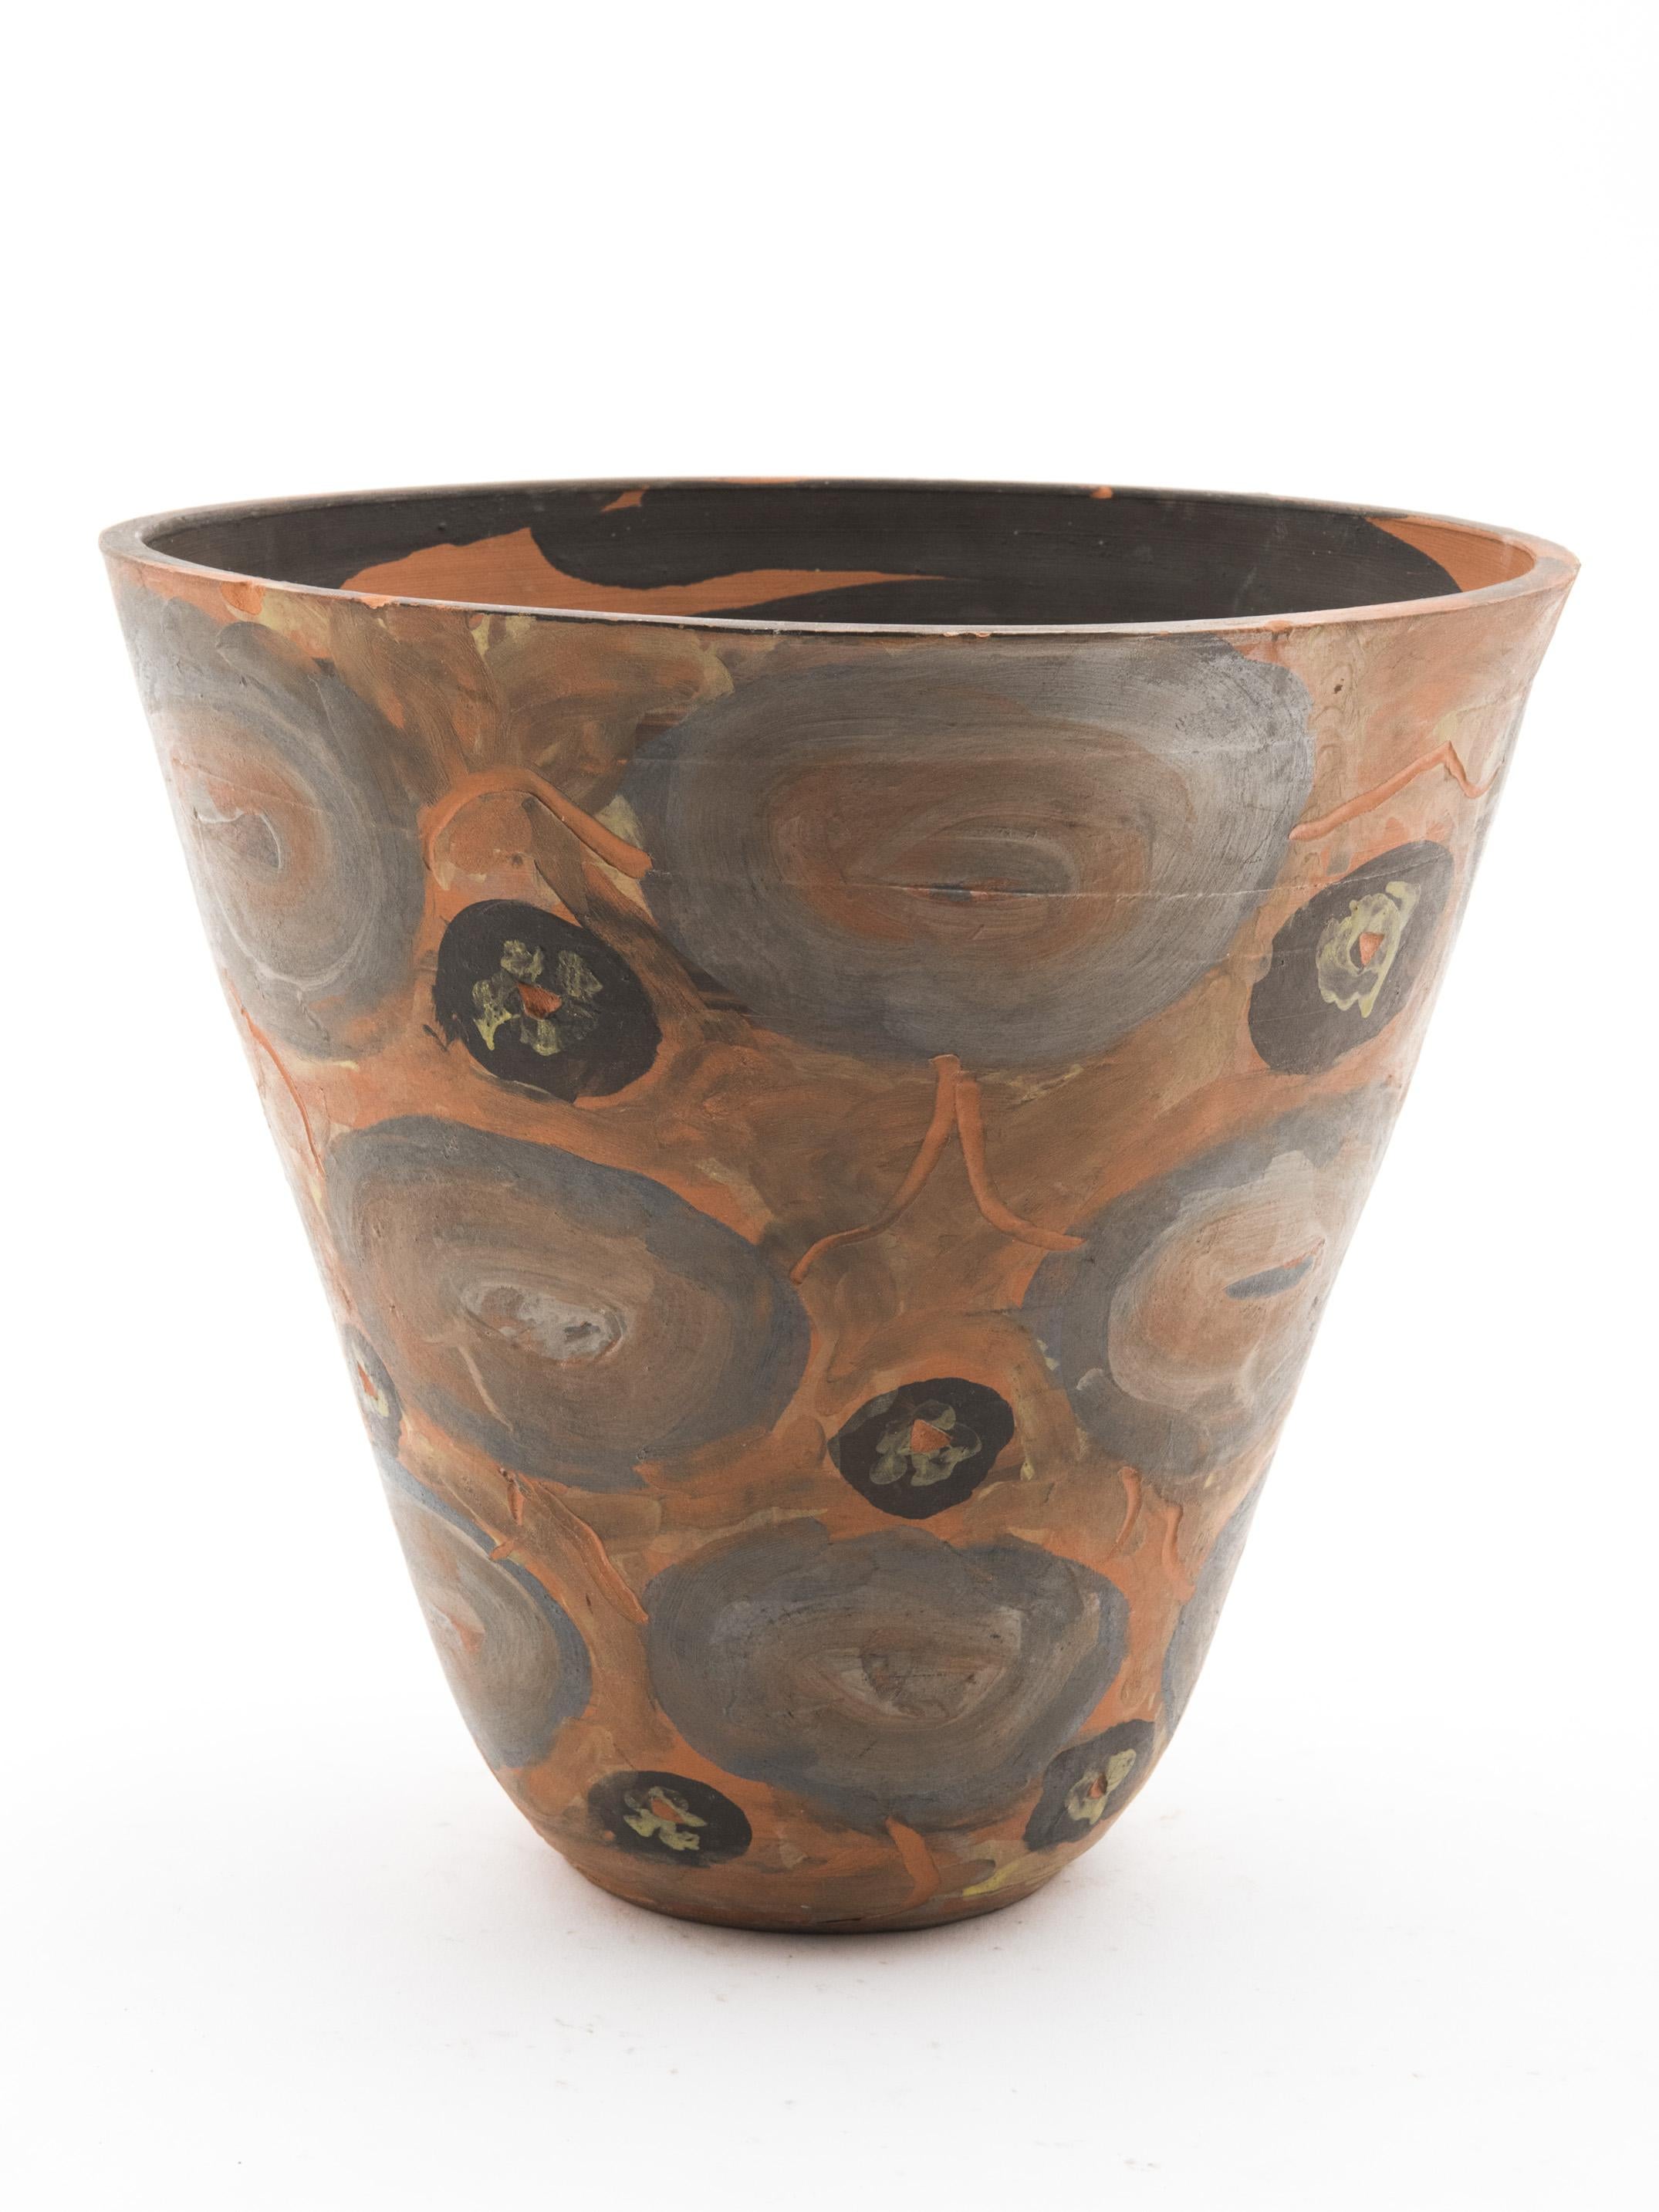 Flower-pot-shaped like terracotta painted object by Jules Agard, 1950s. Thin layer of ceramics decorated inside and out.

About the artist
Jules Agard (1905-1986) was a French ceramist who was already a renowned potter in Vallauris when Suzanne